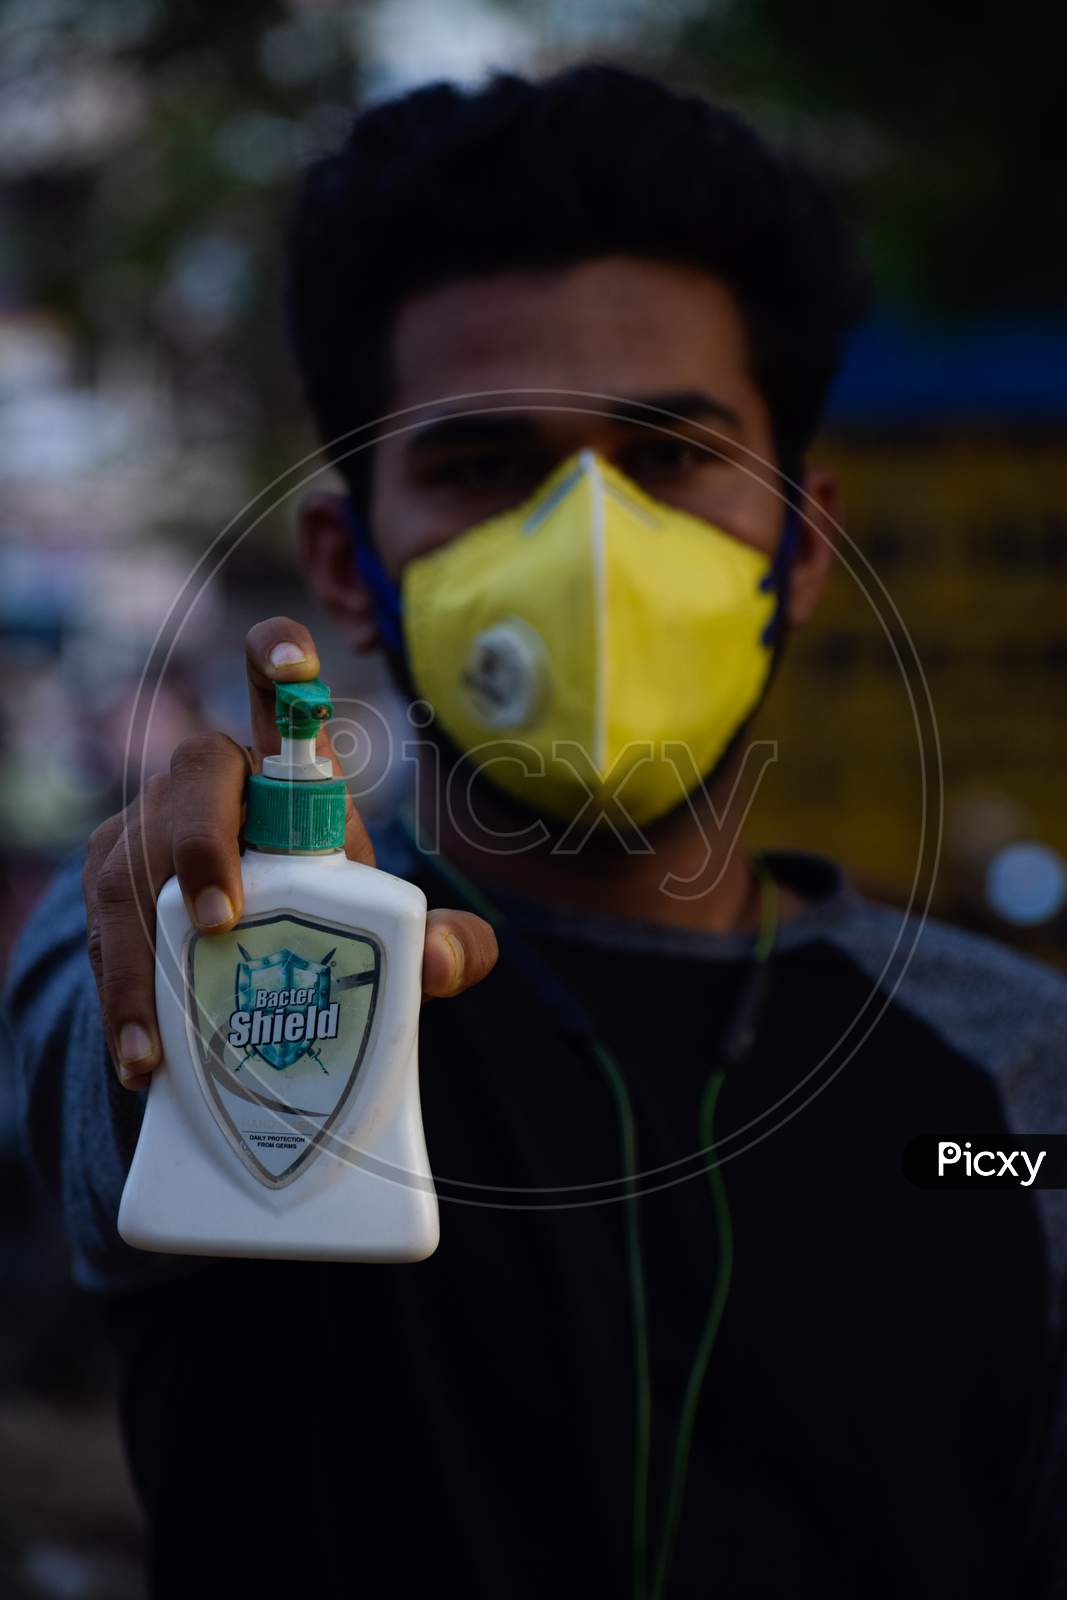 Bharuch, Gujarat/India - March 20, 2020: A men wearing CORONA VIRUS MEDICAL MASK for the prevention of COVID-19 CORONA VIRUS while showing sanitizer in his hand. Selective focus.